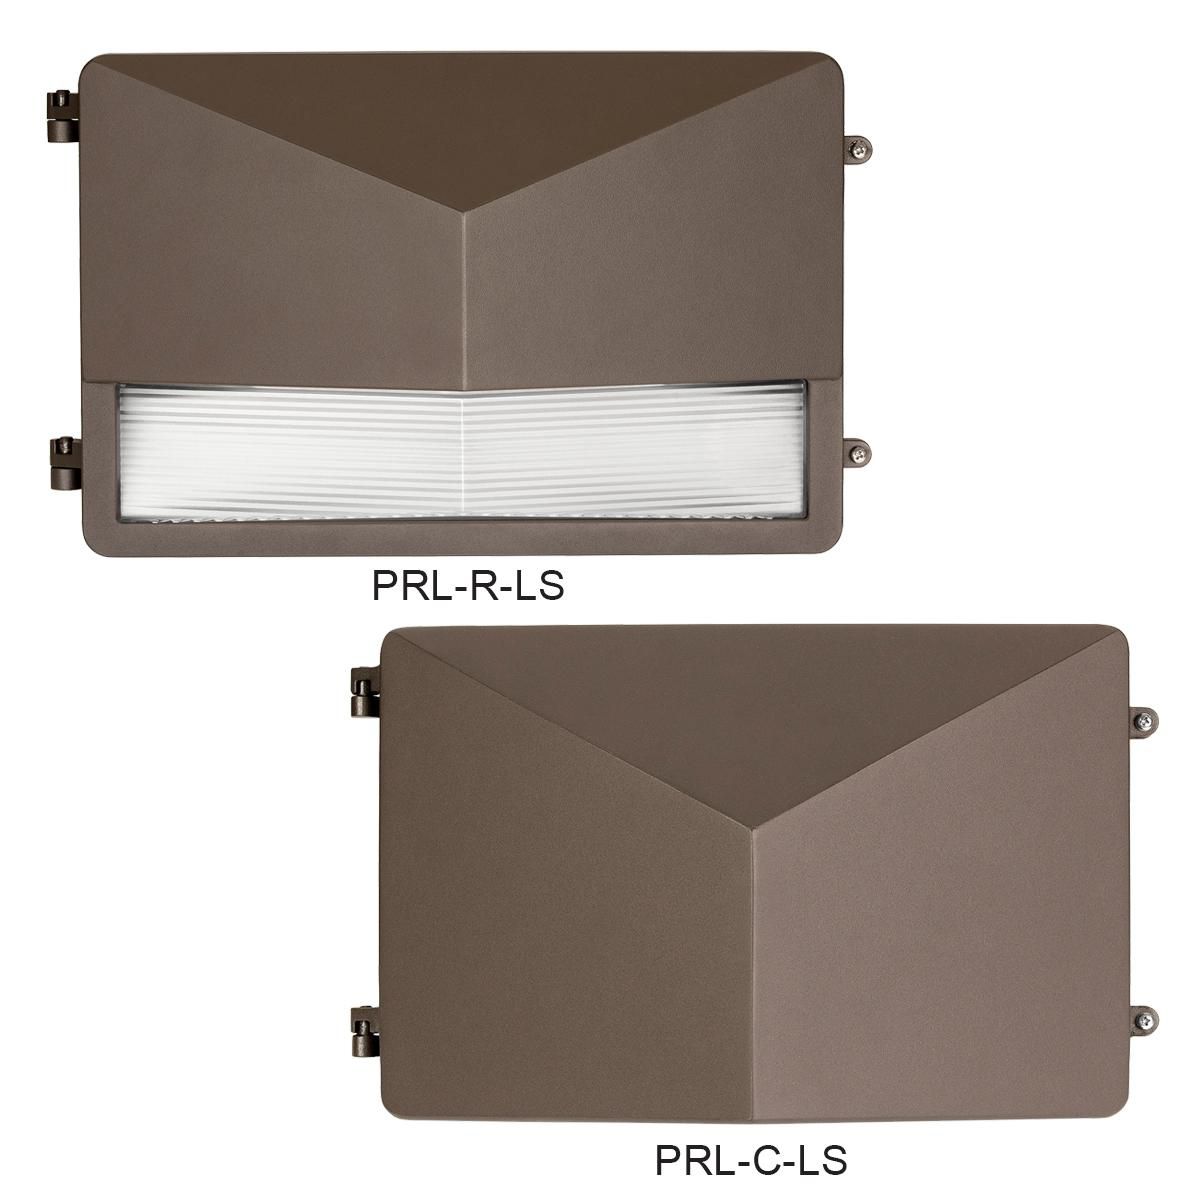 PRS Perimshield refractor wall mount luminaire features a vandal resistant polycarbonate refractor that provides ambient lighting for safety and security to any facility. Impact resistant, UV stabilized field replaceable polycarbonate refractor provides low maintenance and rugged construction.